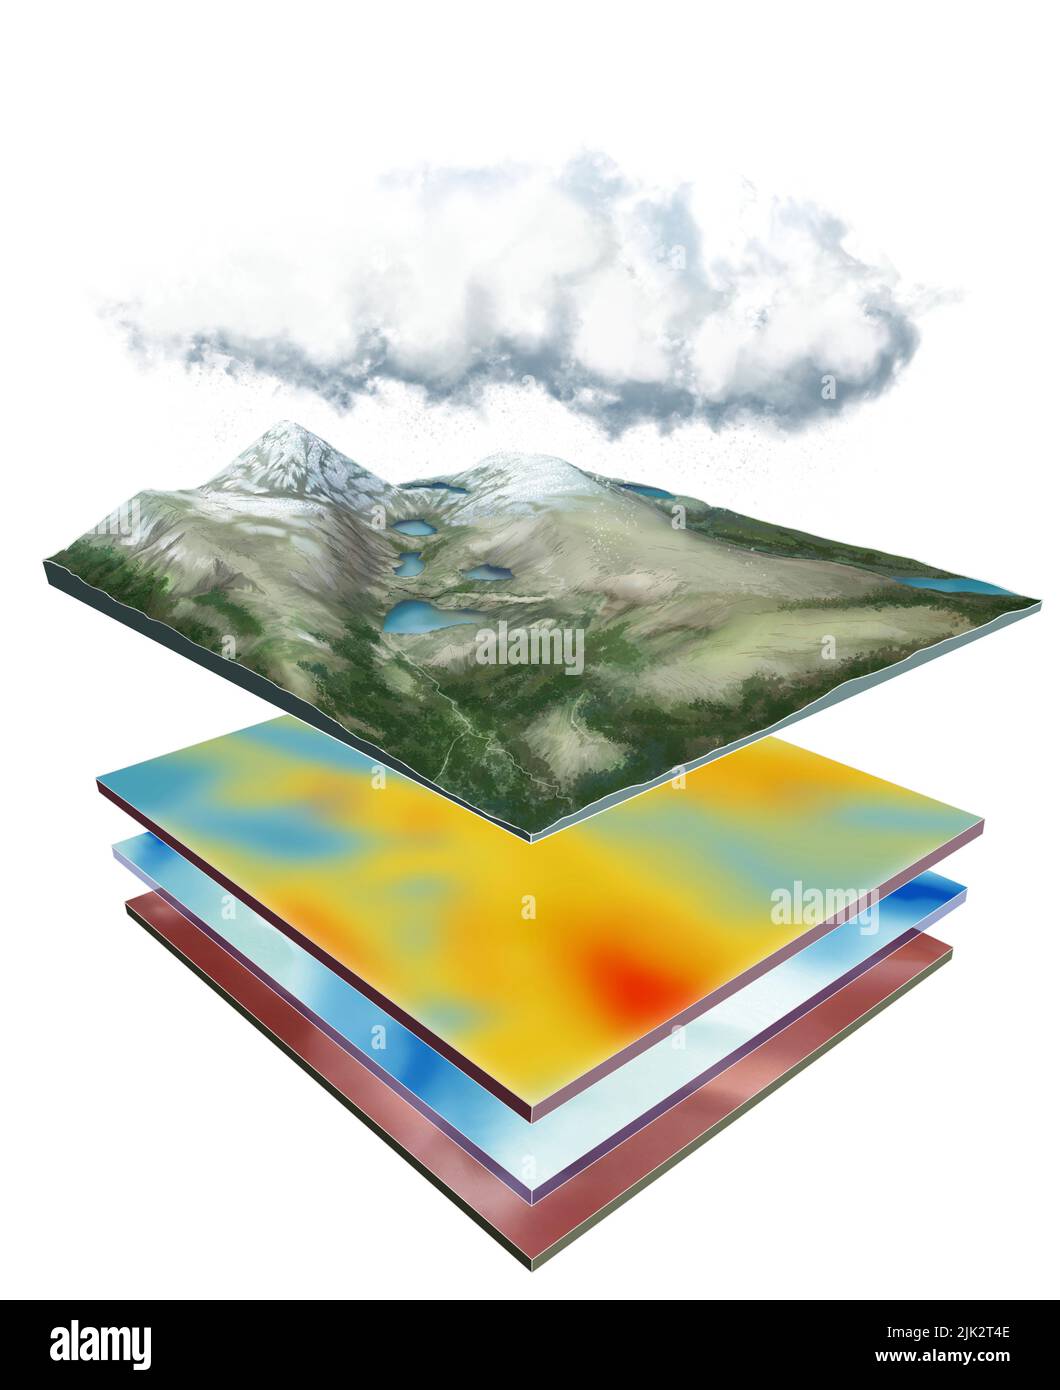 Illustration shwoing a section of Nitwot Ridge in Colorado, USA over a heat map, water map and soil map. Stock Photo